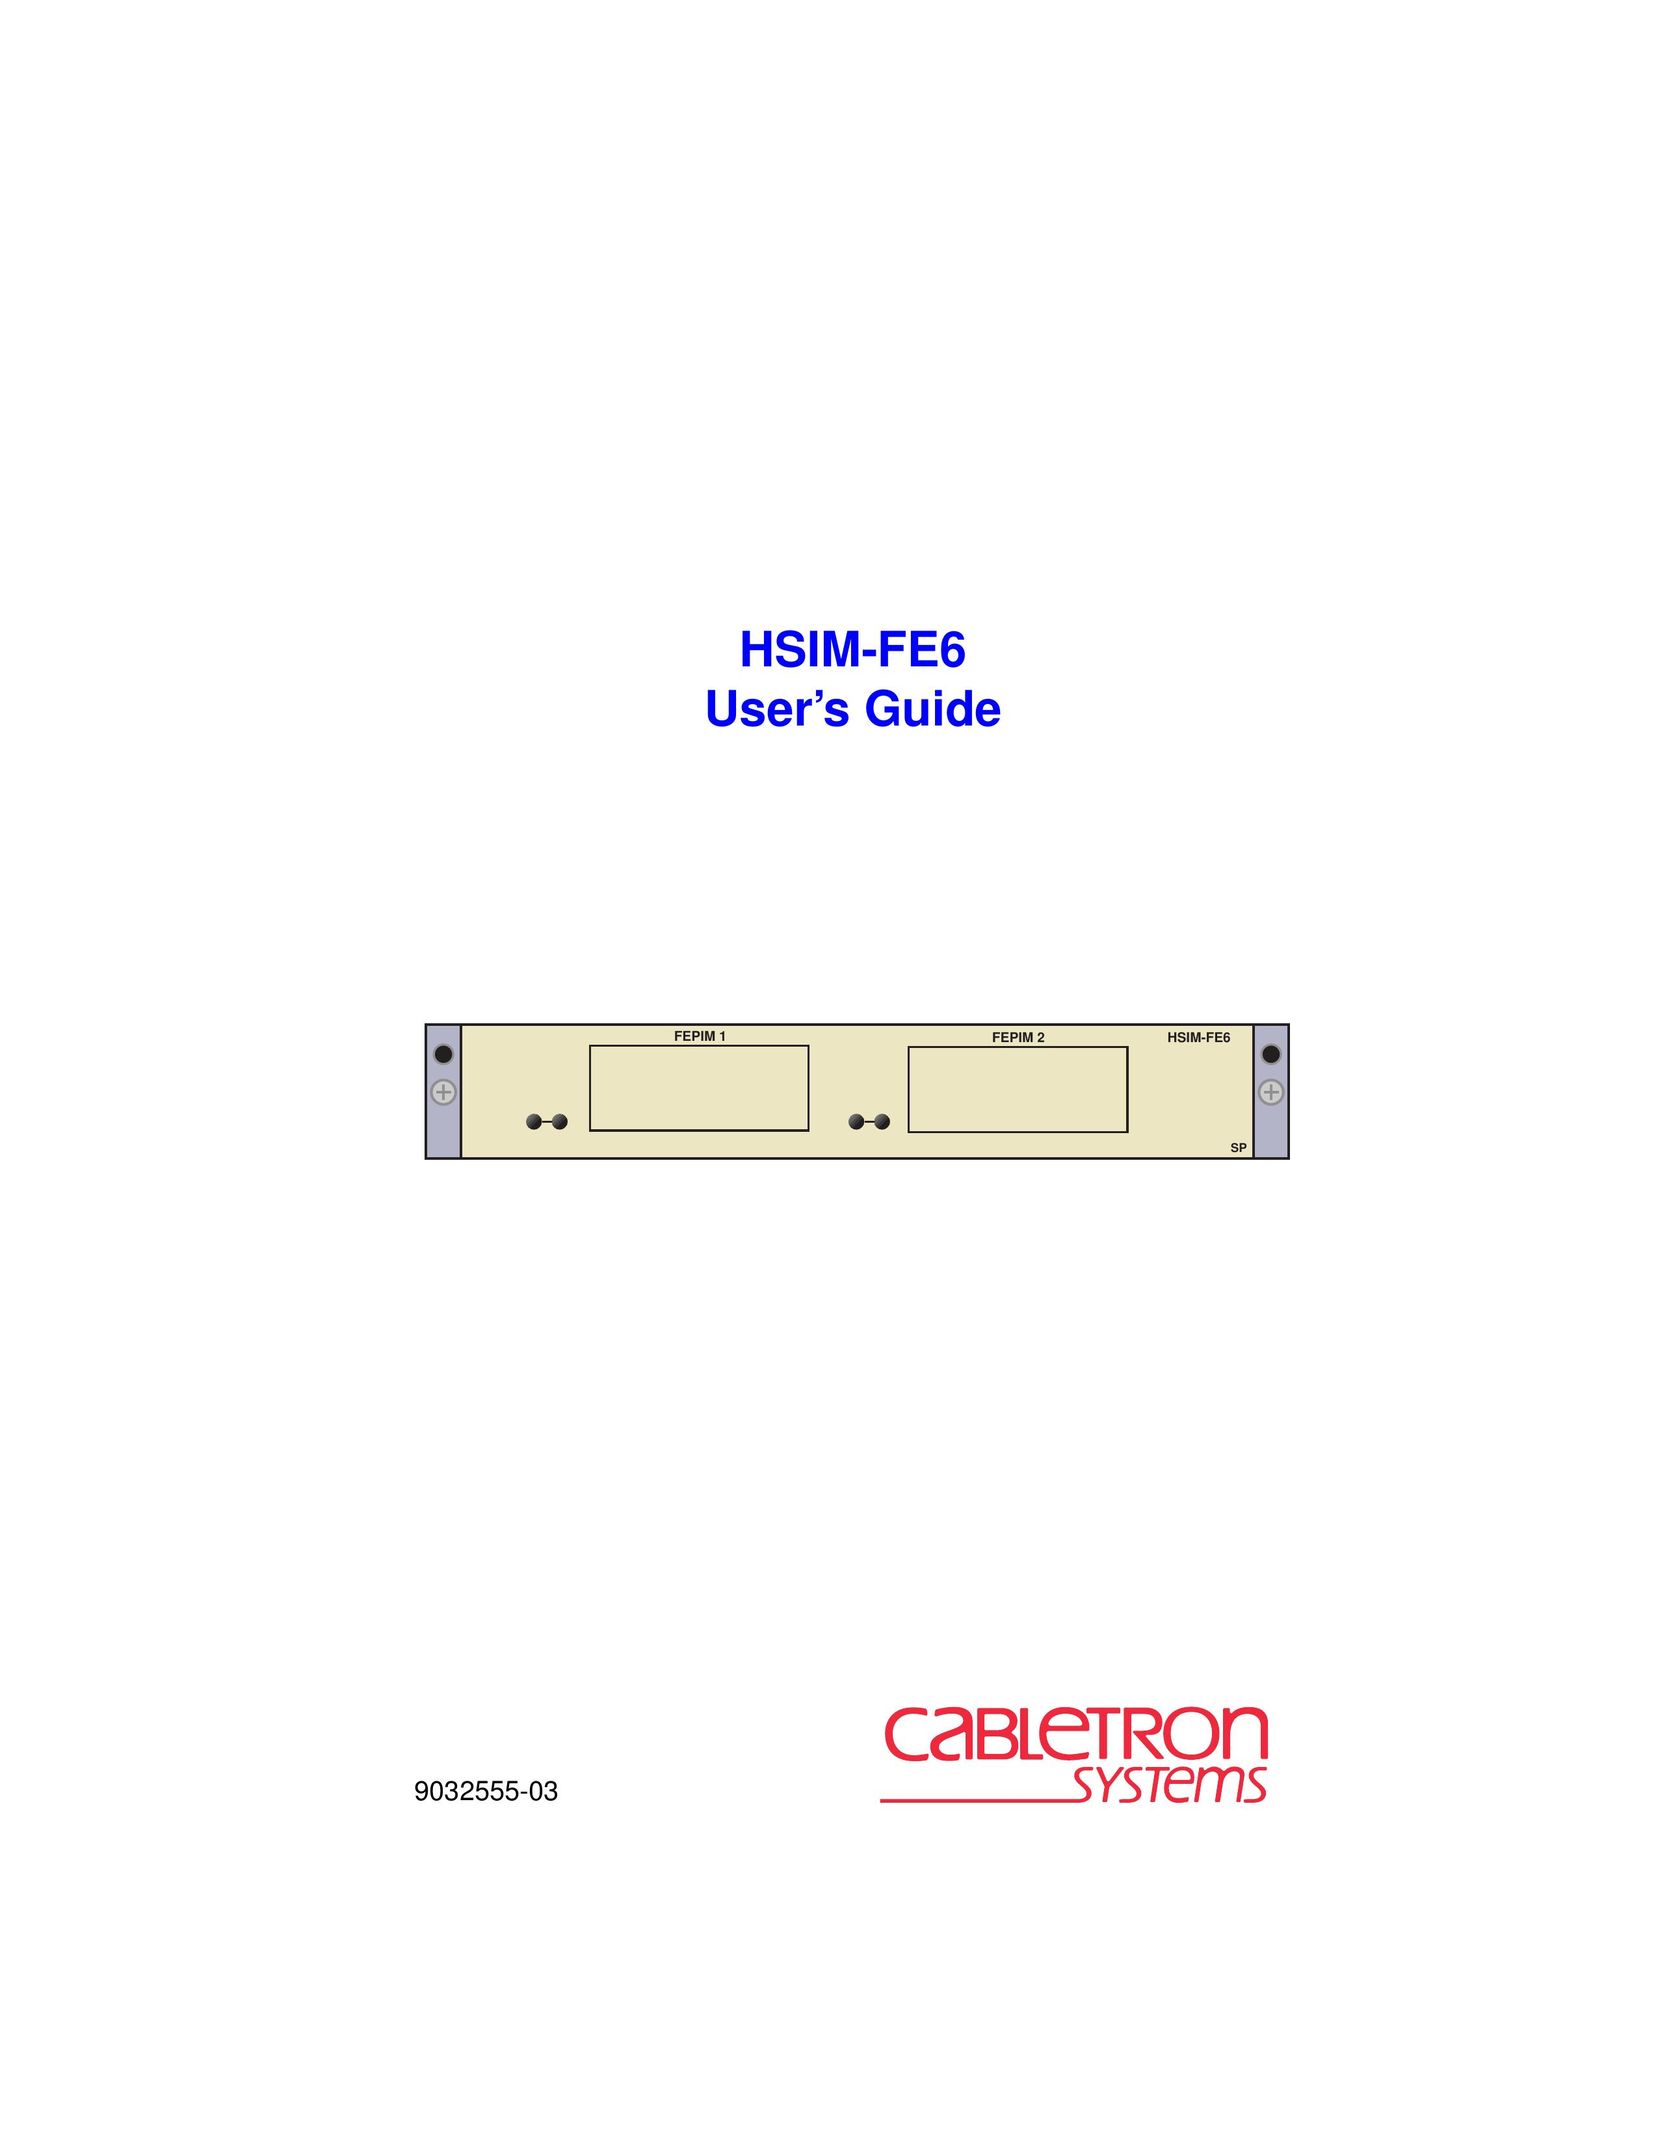 Cabletron Systems HSIM-FE6 Network Card User Manual